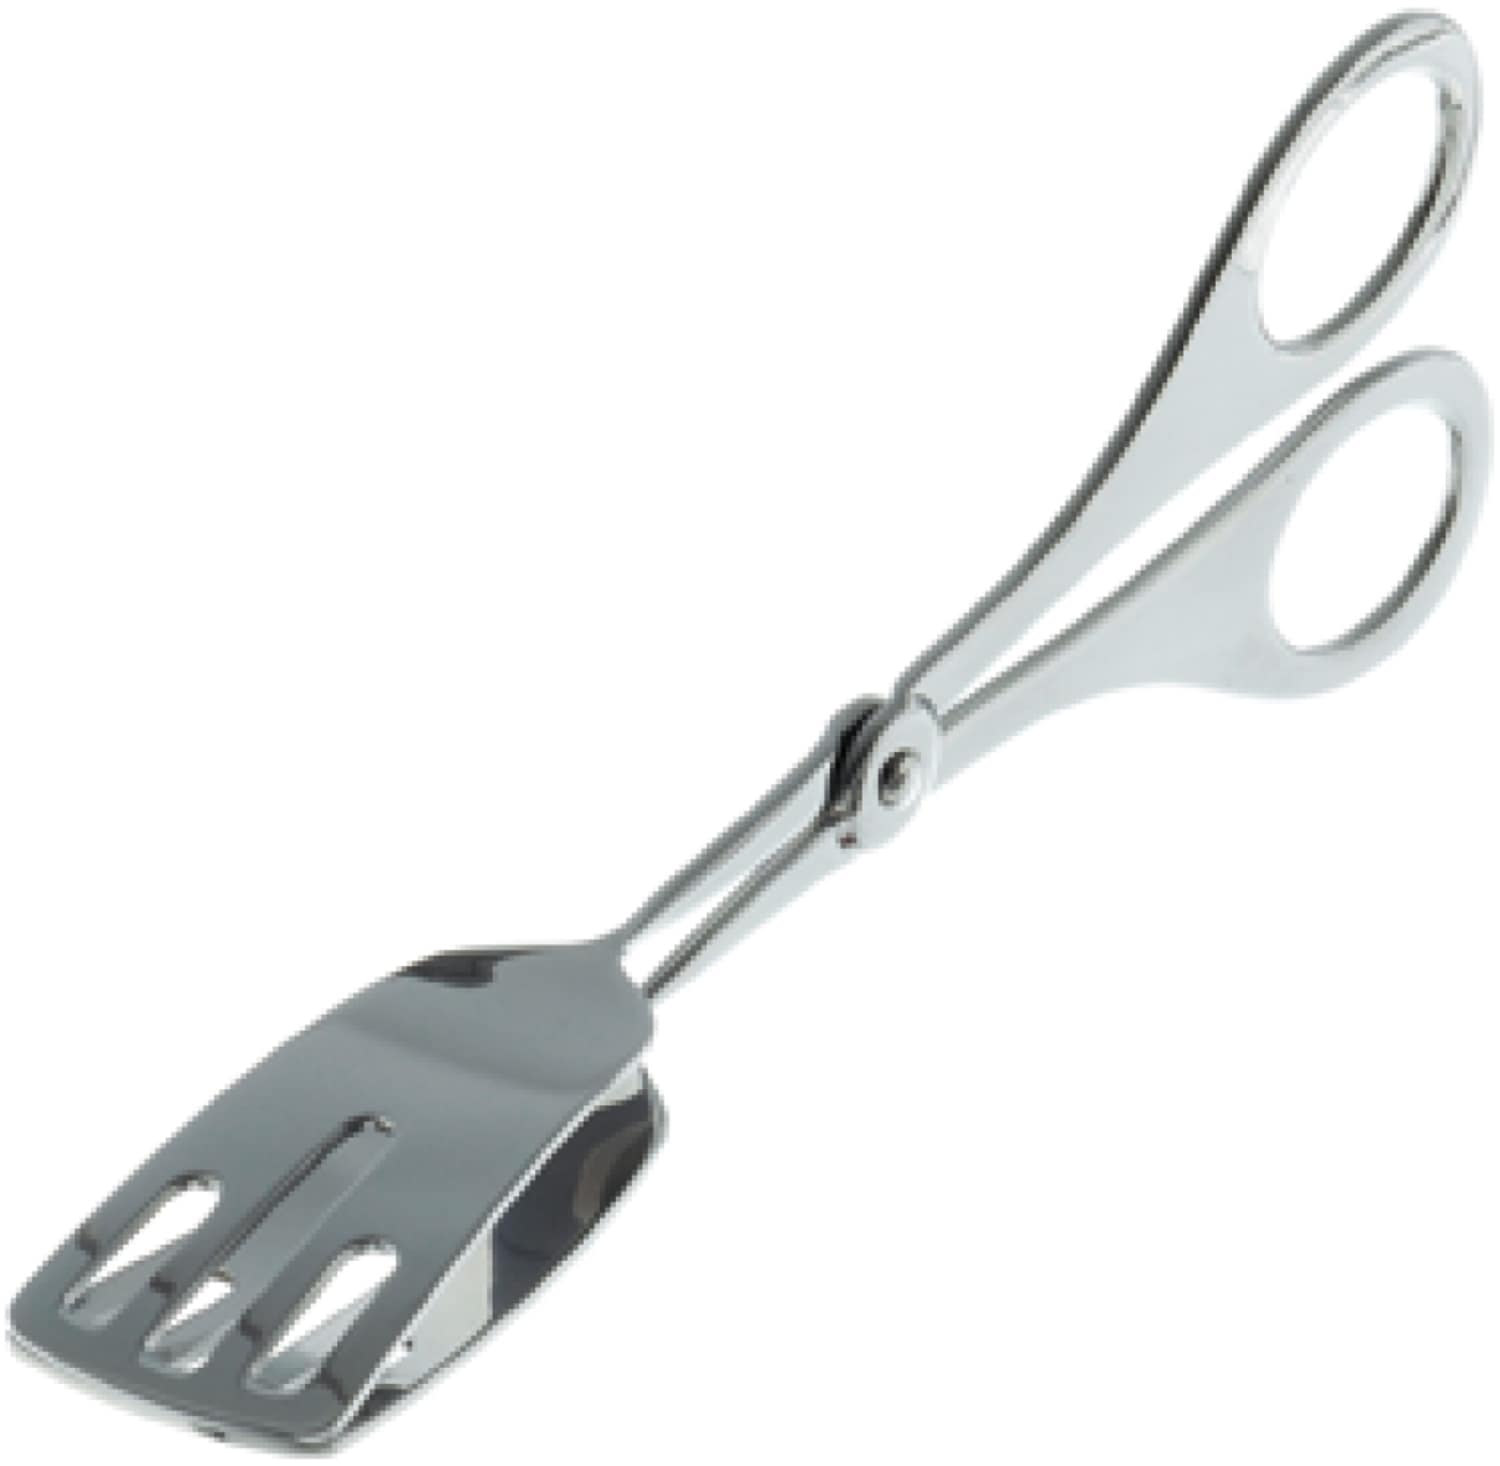 Pastry tongs open